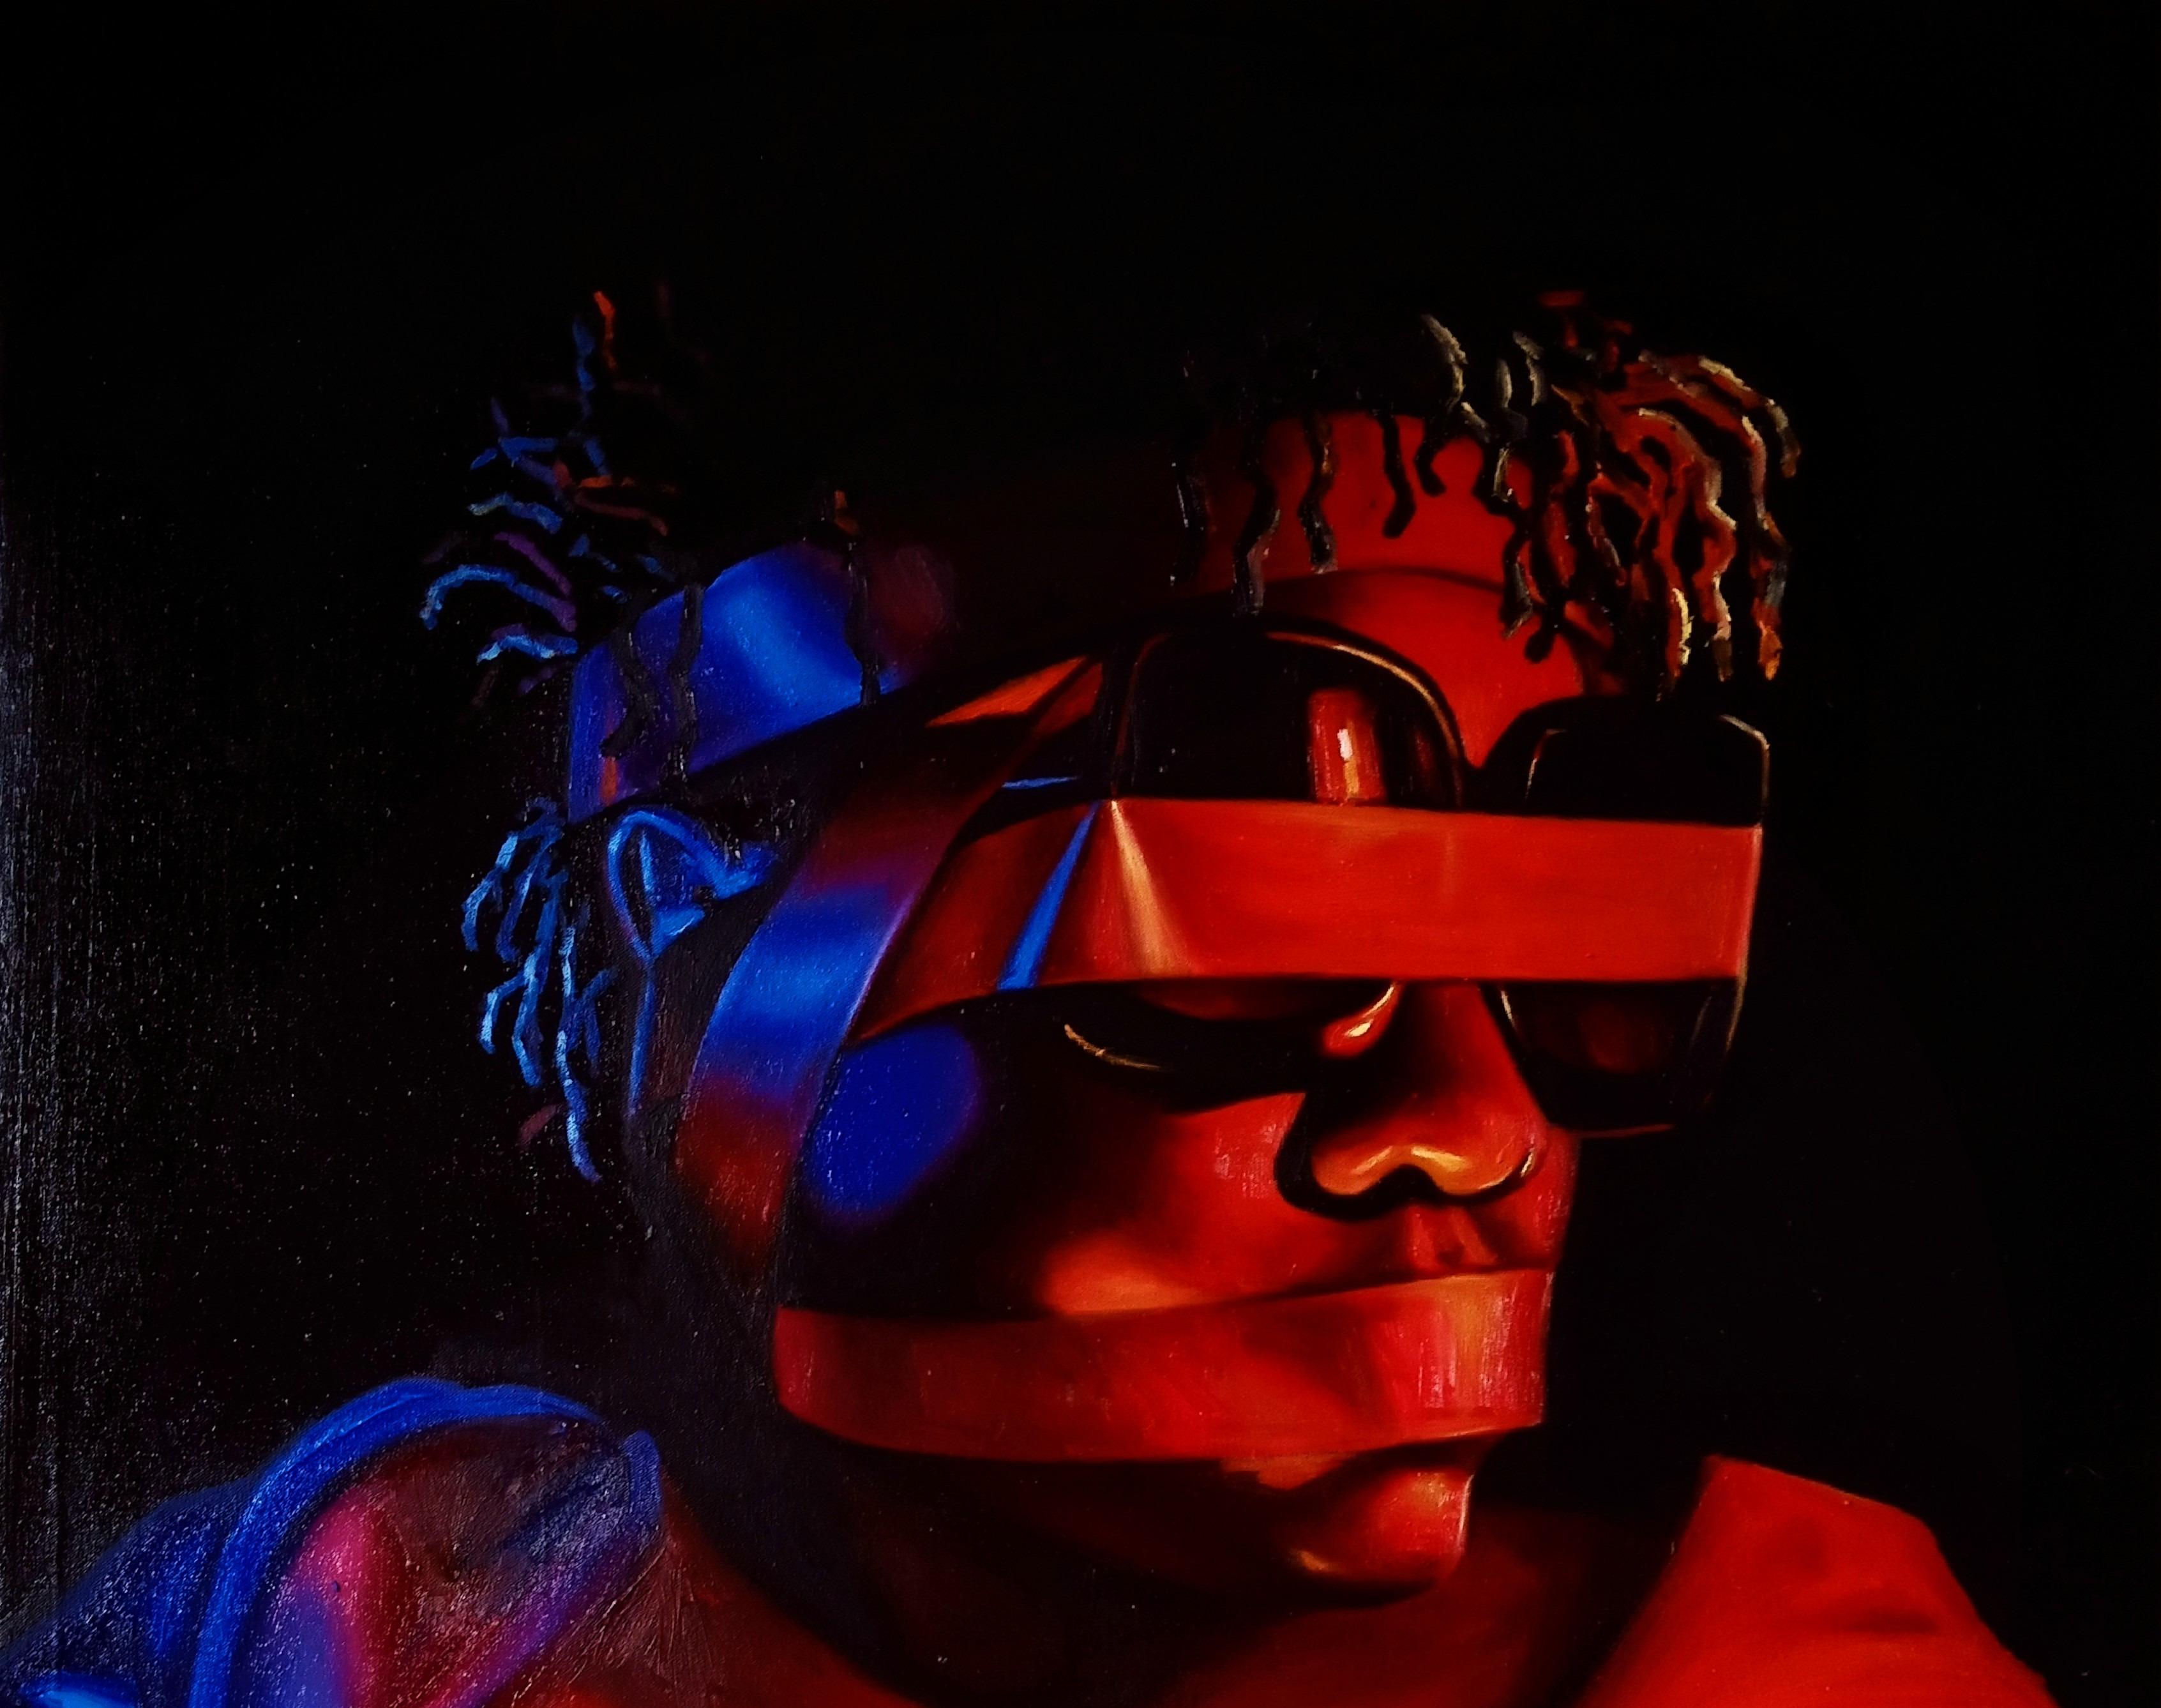 Shaded 1 - Painting by Awosola Michael Angello